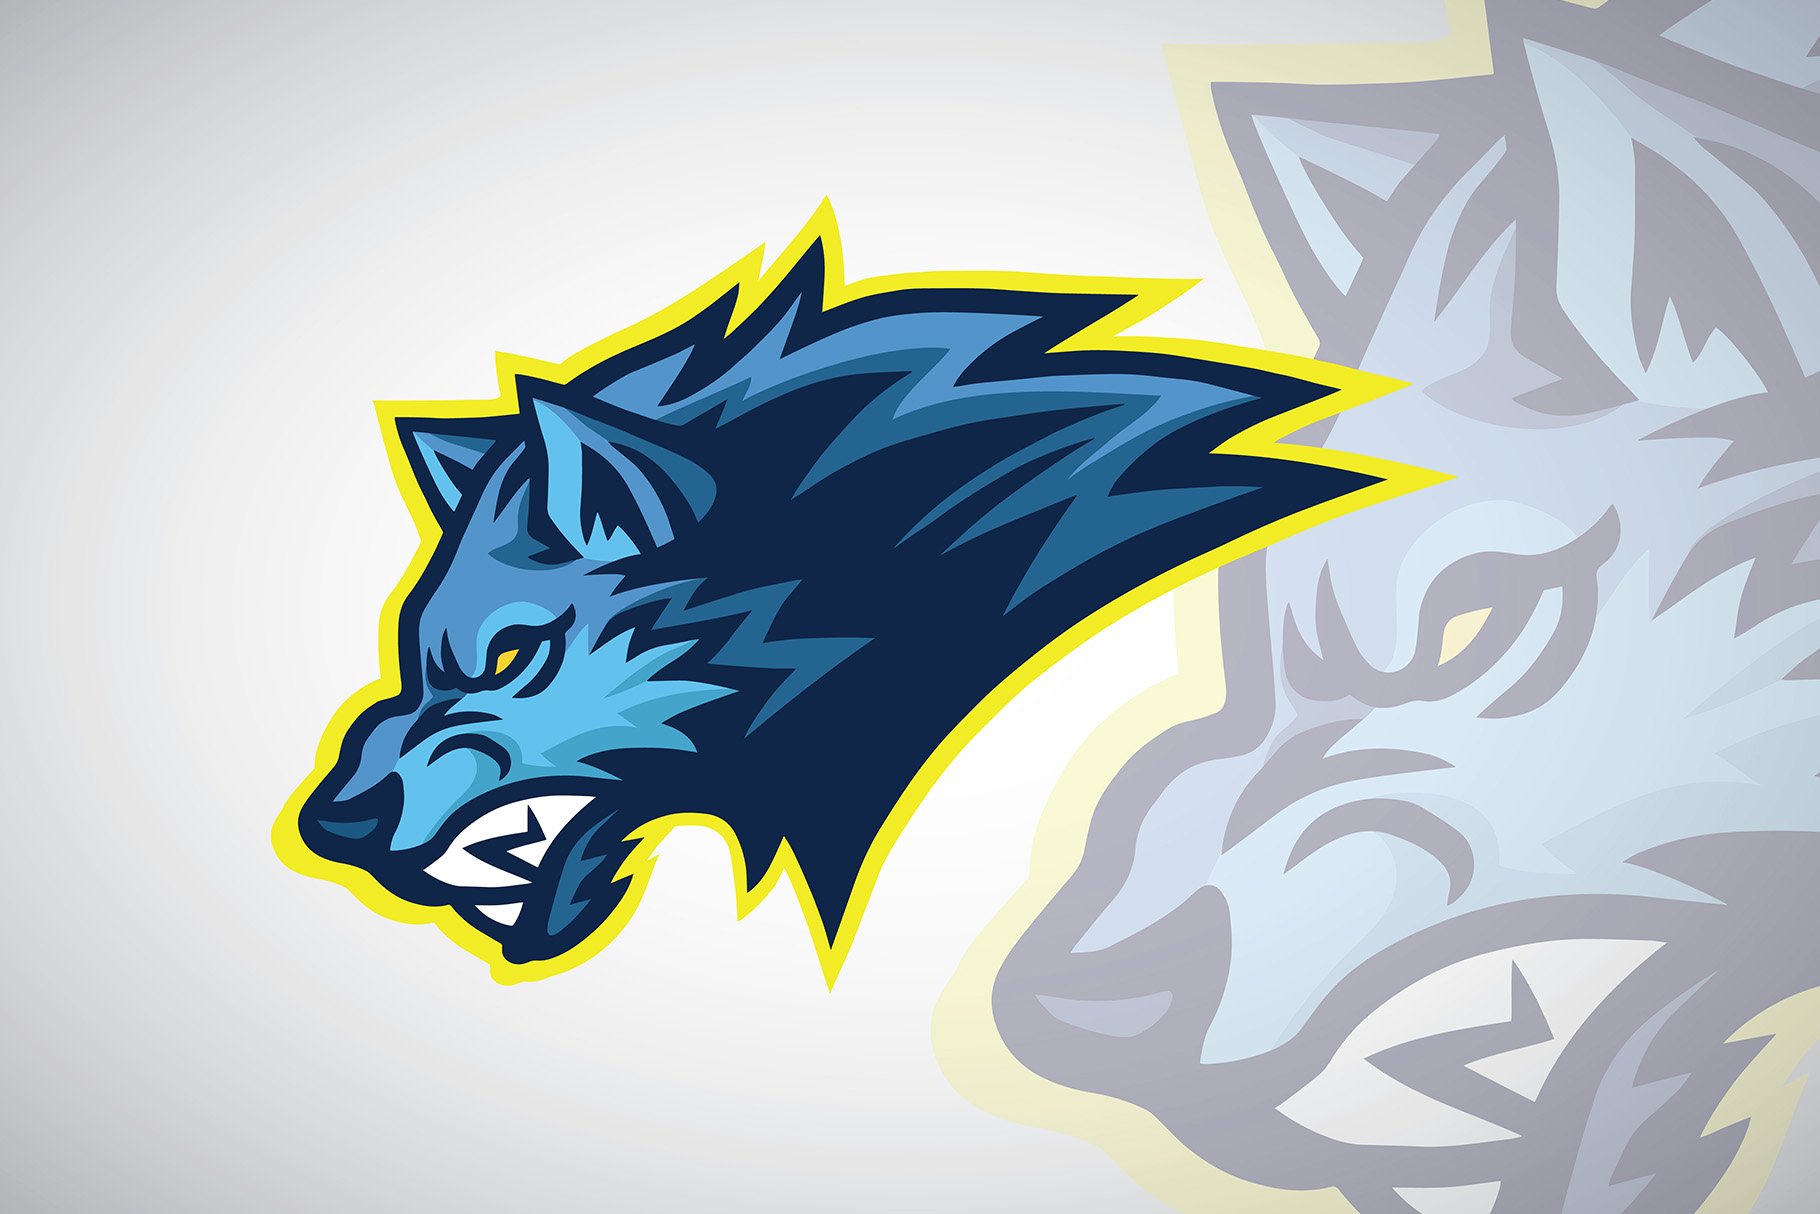 Snarling Wolf Logo Esports Sports cover image.